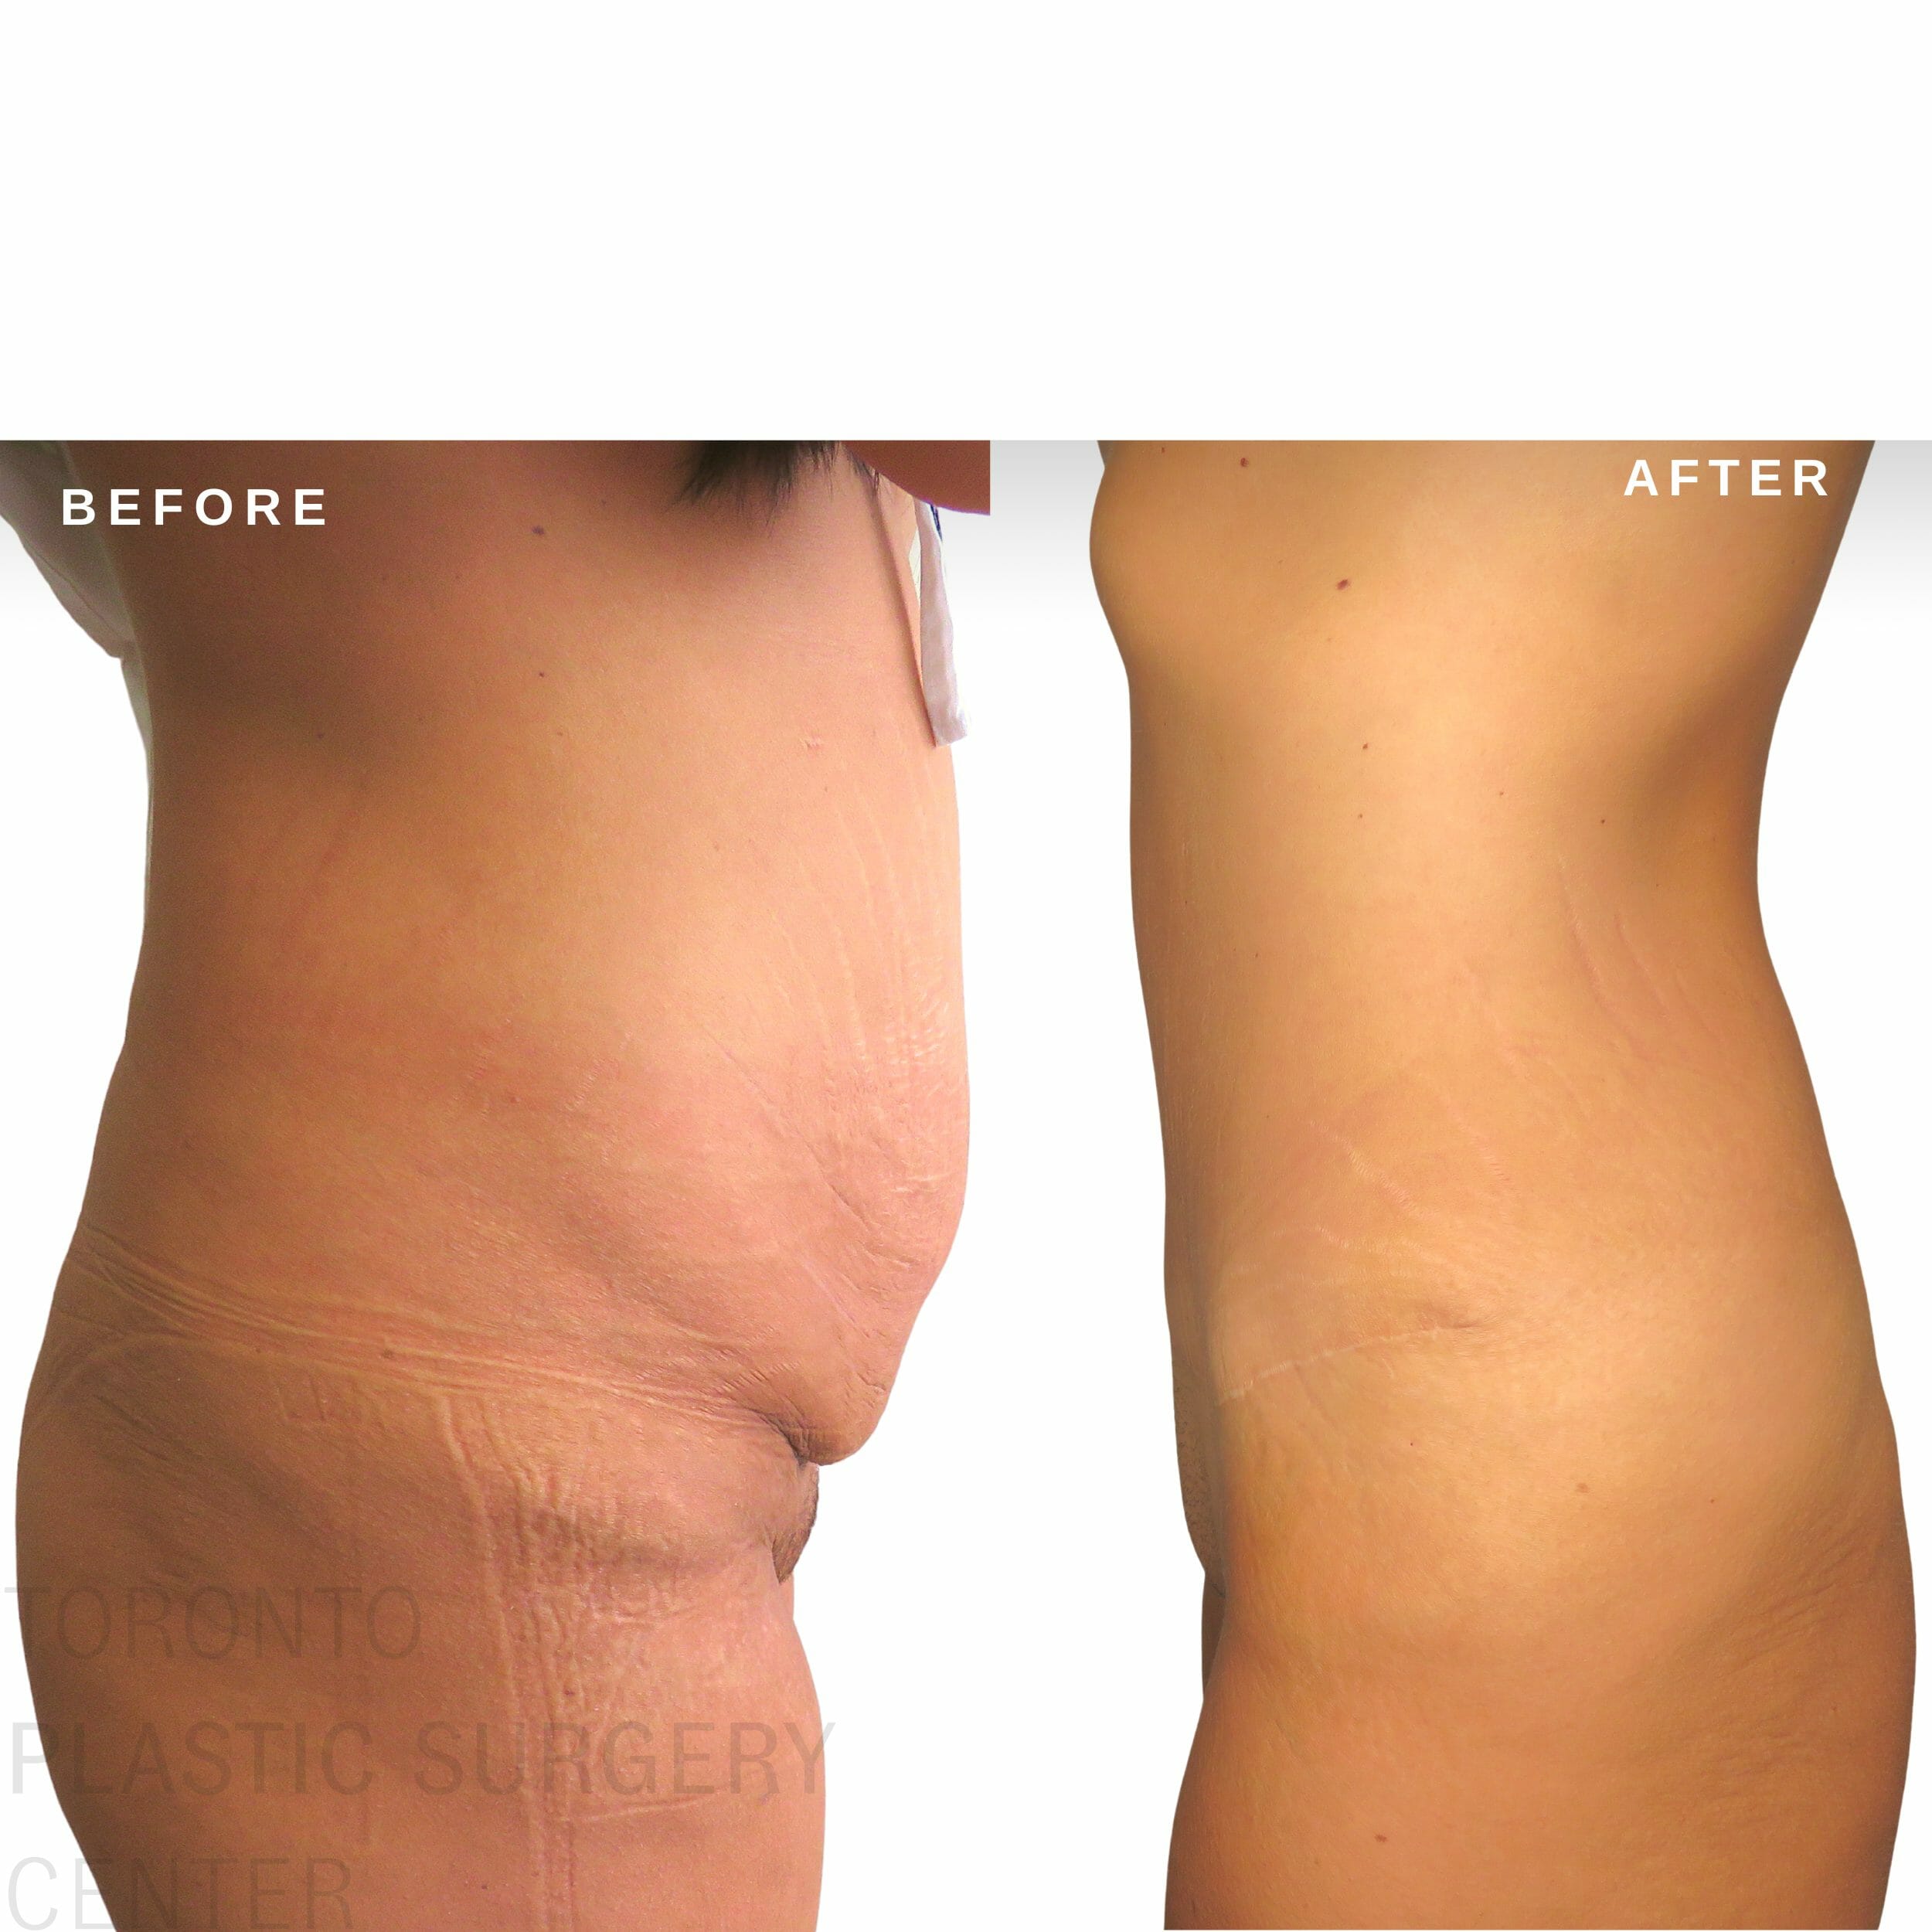 Toronto Liposuction Clinic - See Costs & Before/Afters!